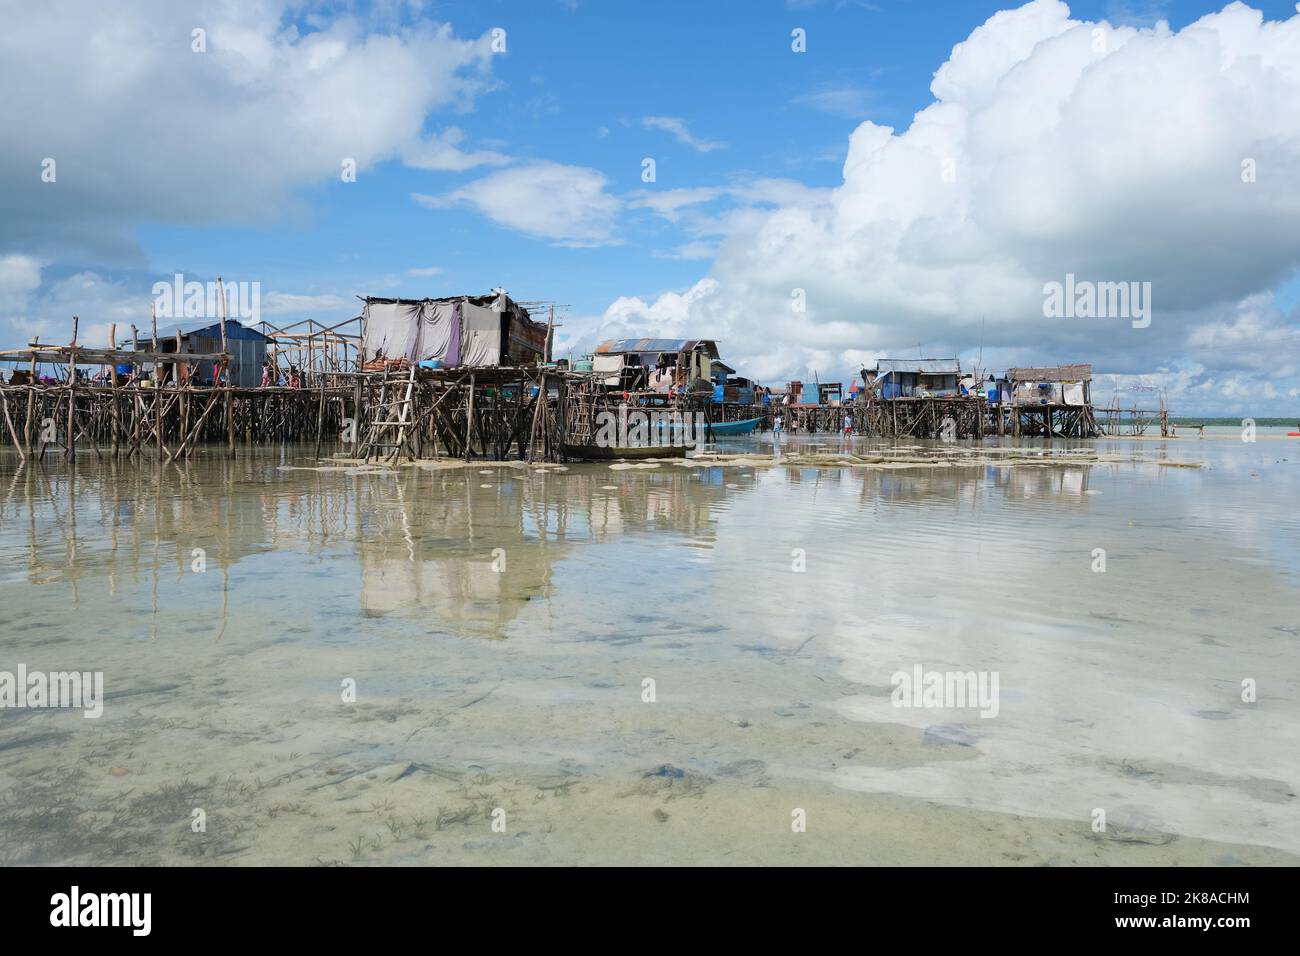 Omadal Island is a Malaysian island located in the Celebes Sea on the state of Sabah. The bajau laut village community during low tide time. Stock Photo